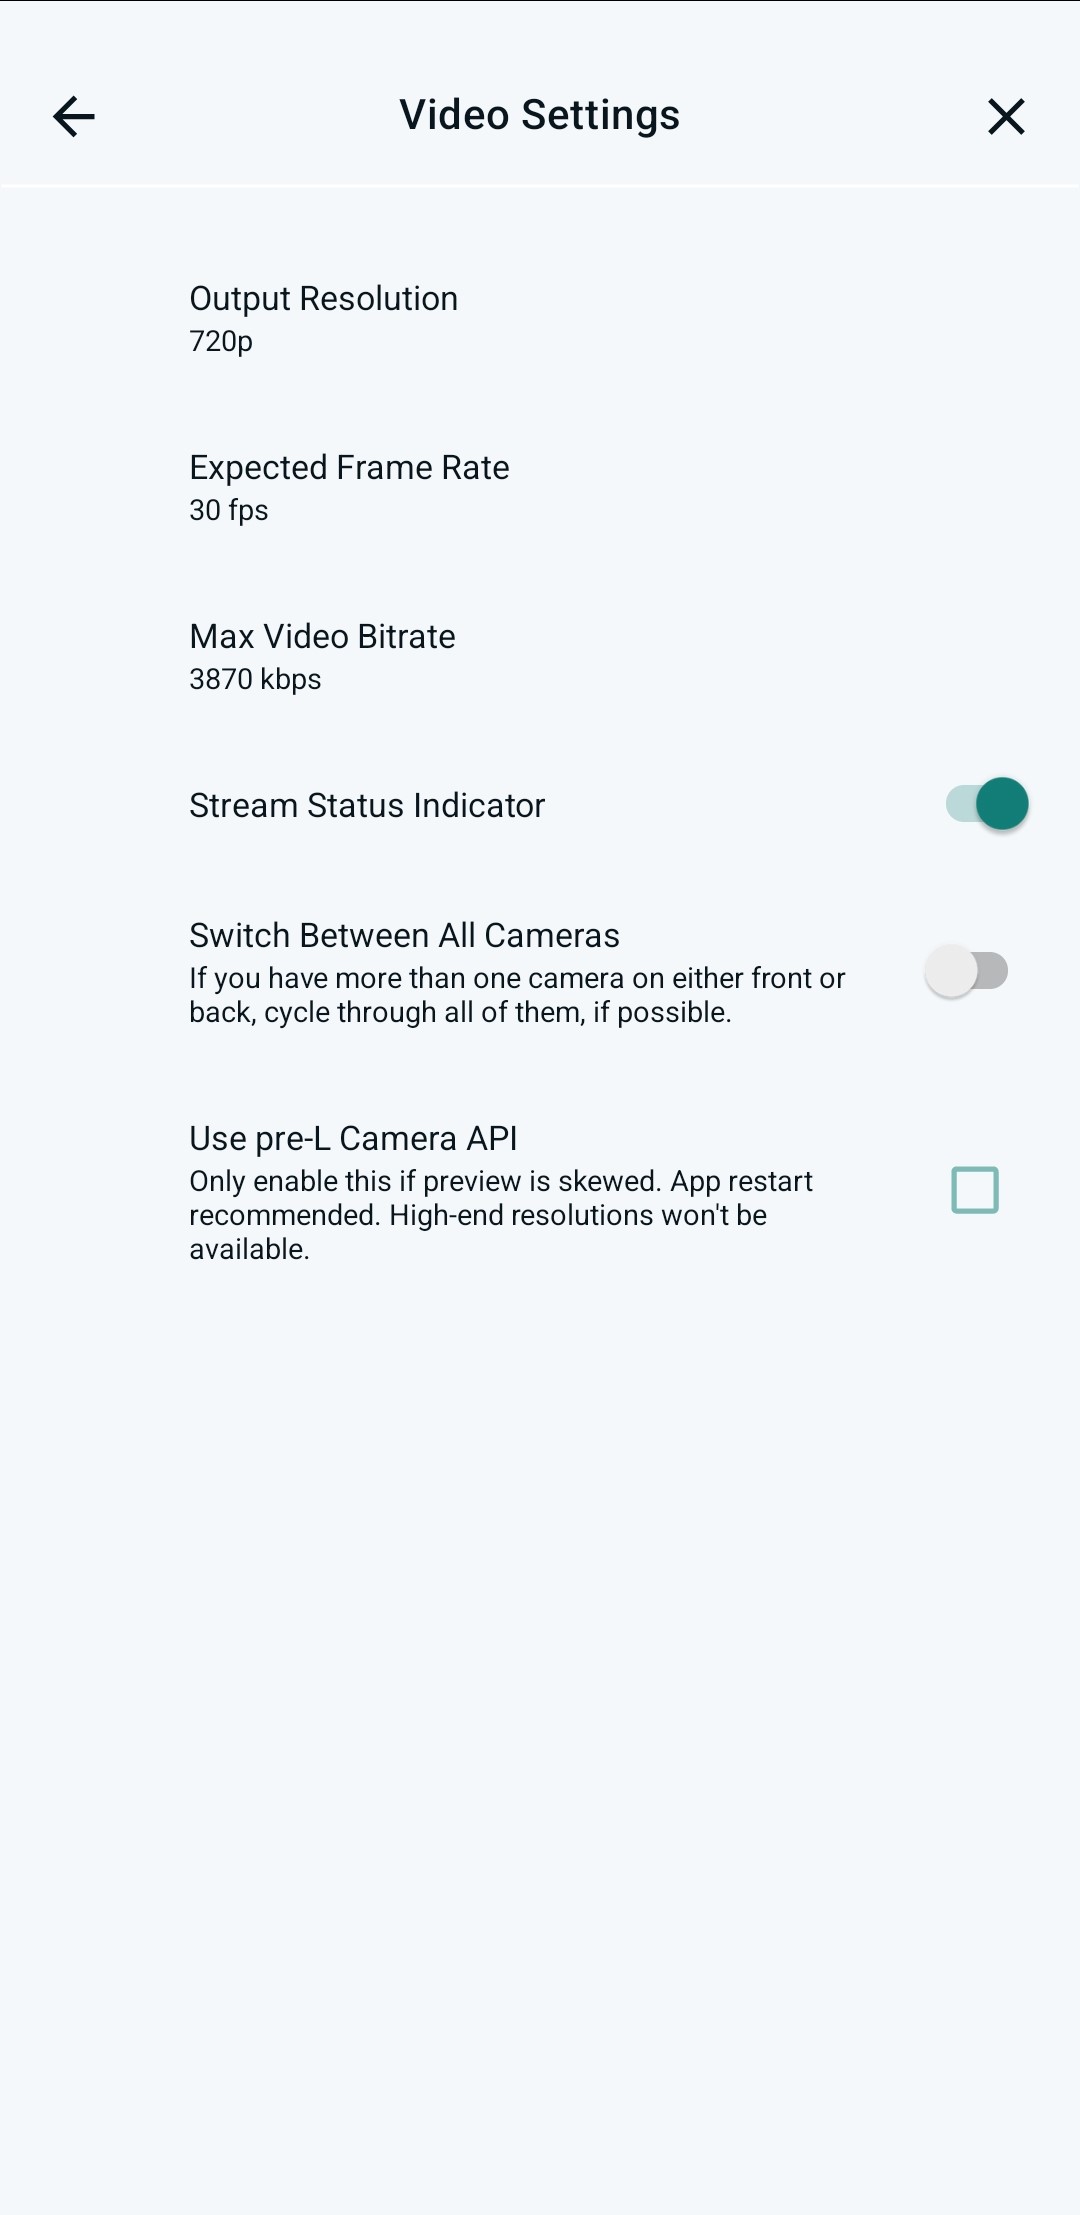 Setting video resolution and bitrate for streaming